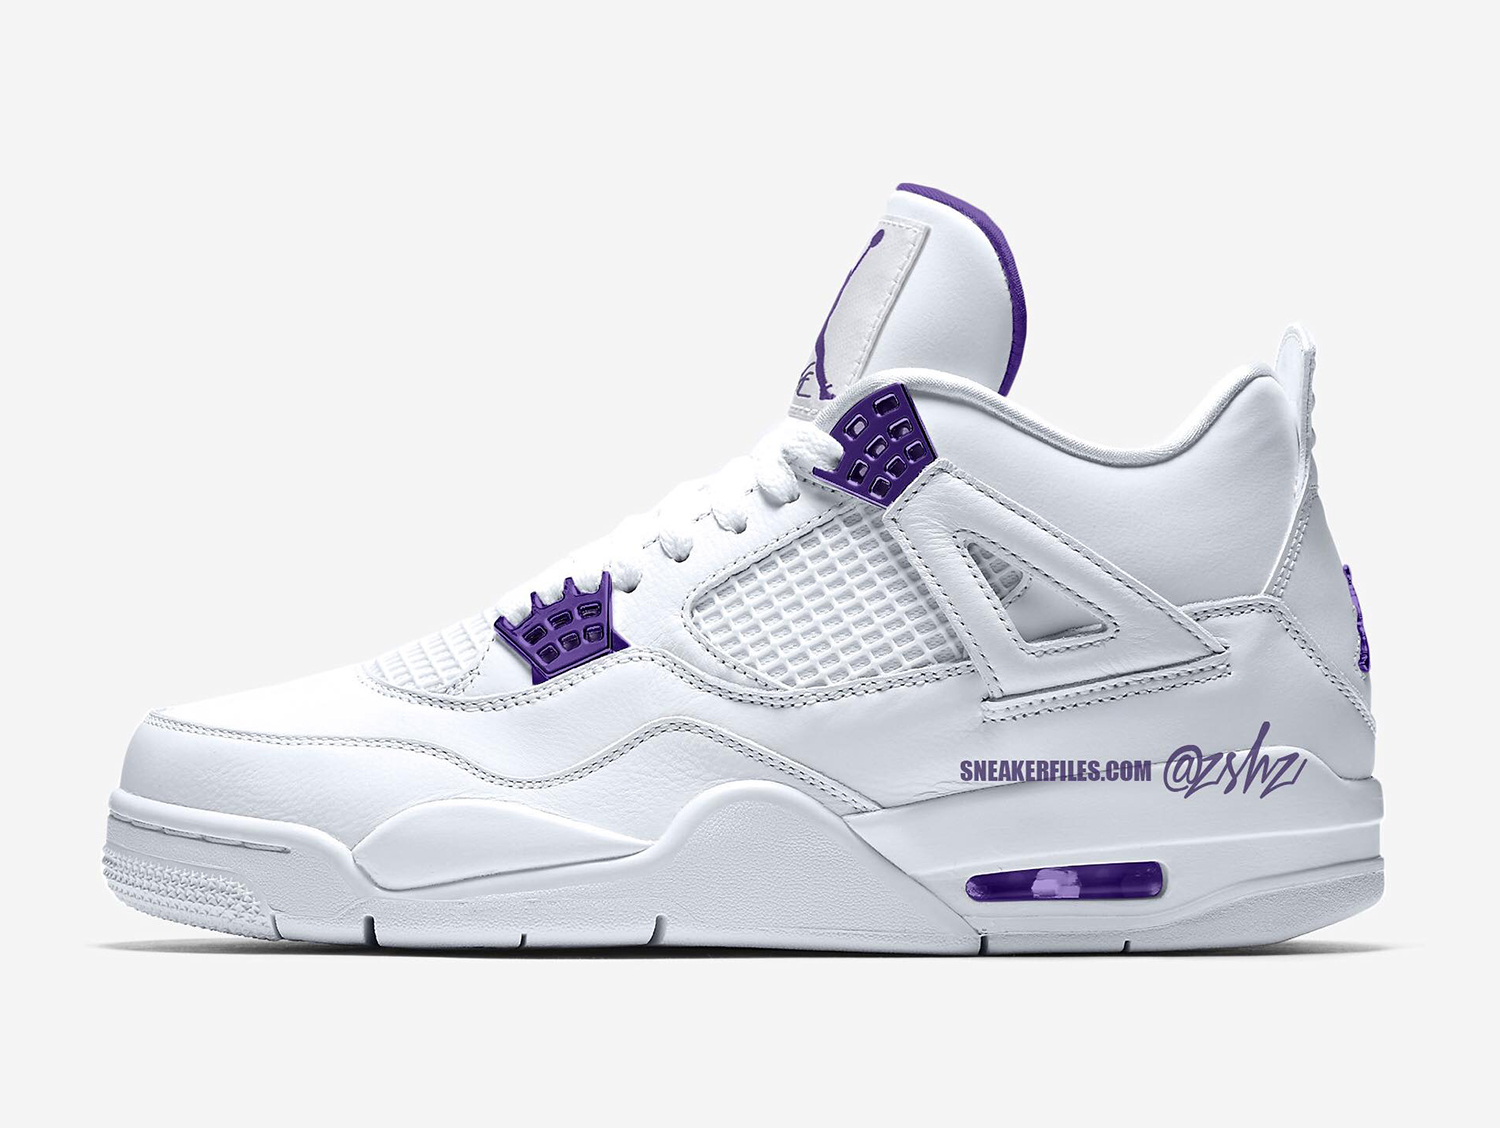 the white and purple jordans